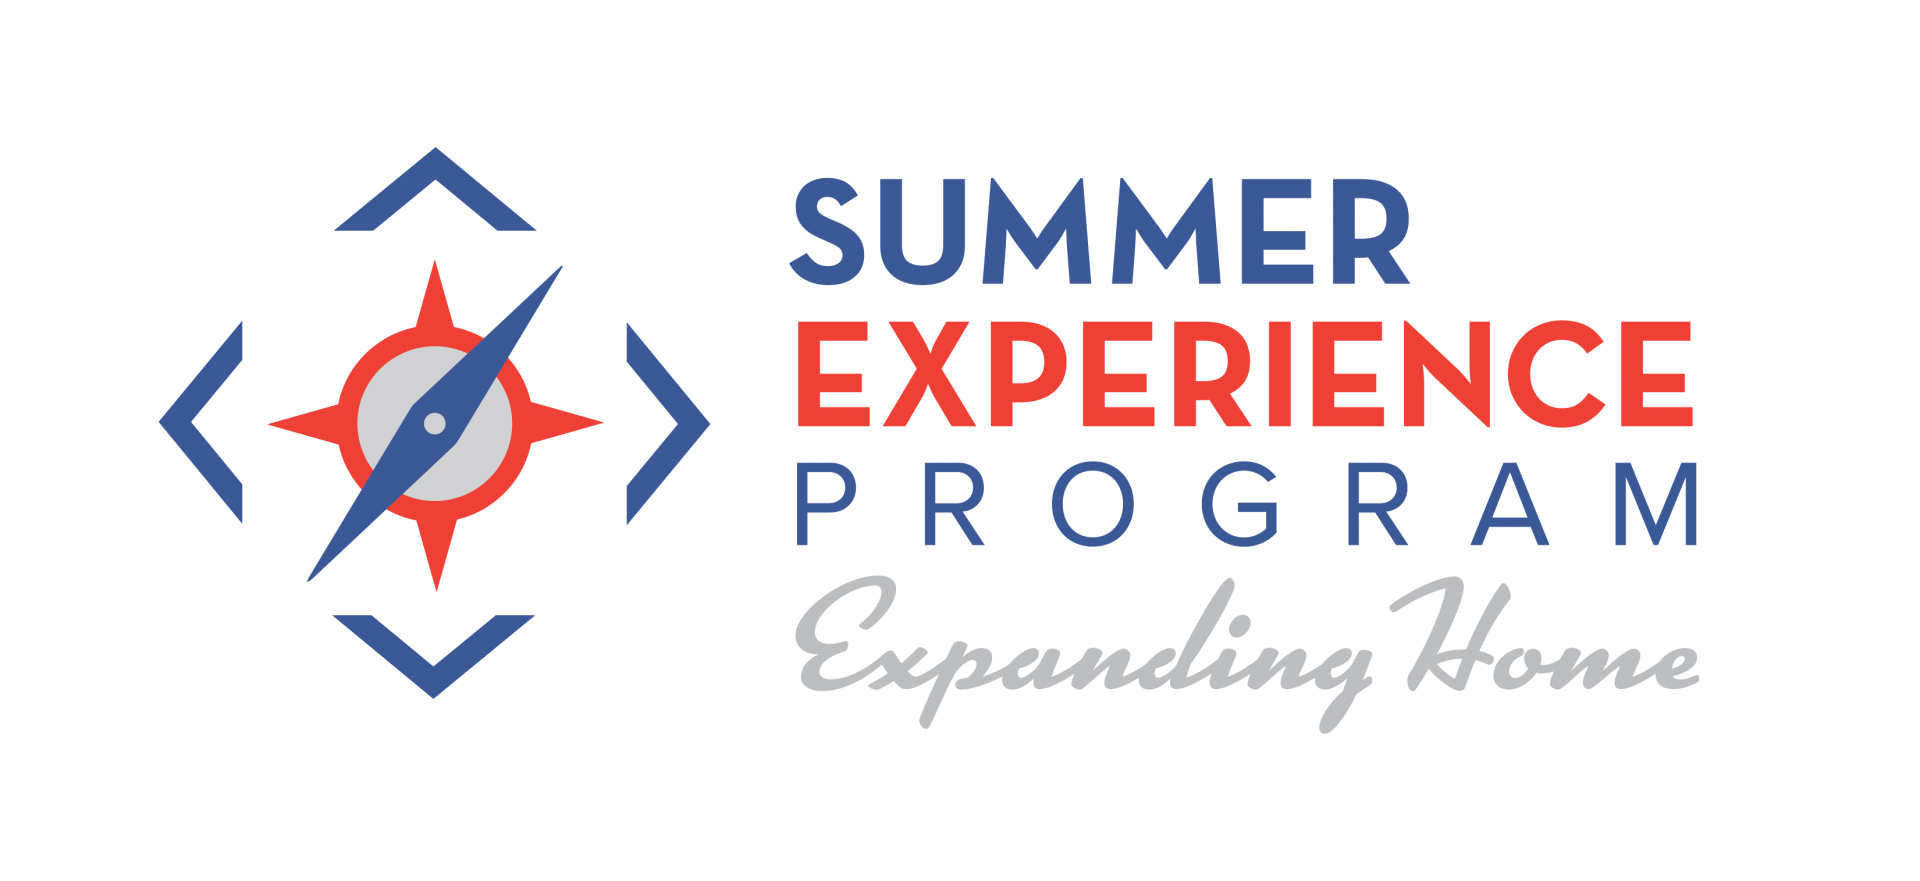 Summer Experience Program Geneseo: Expanding Home